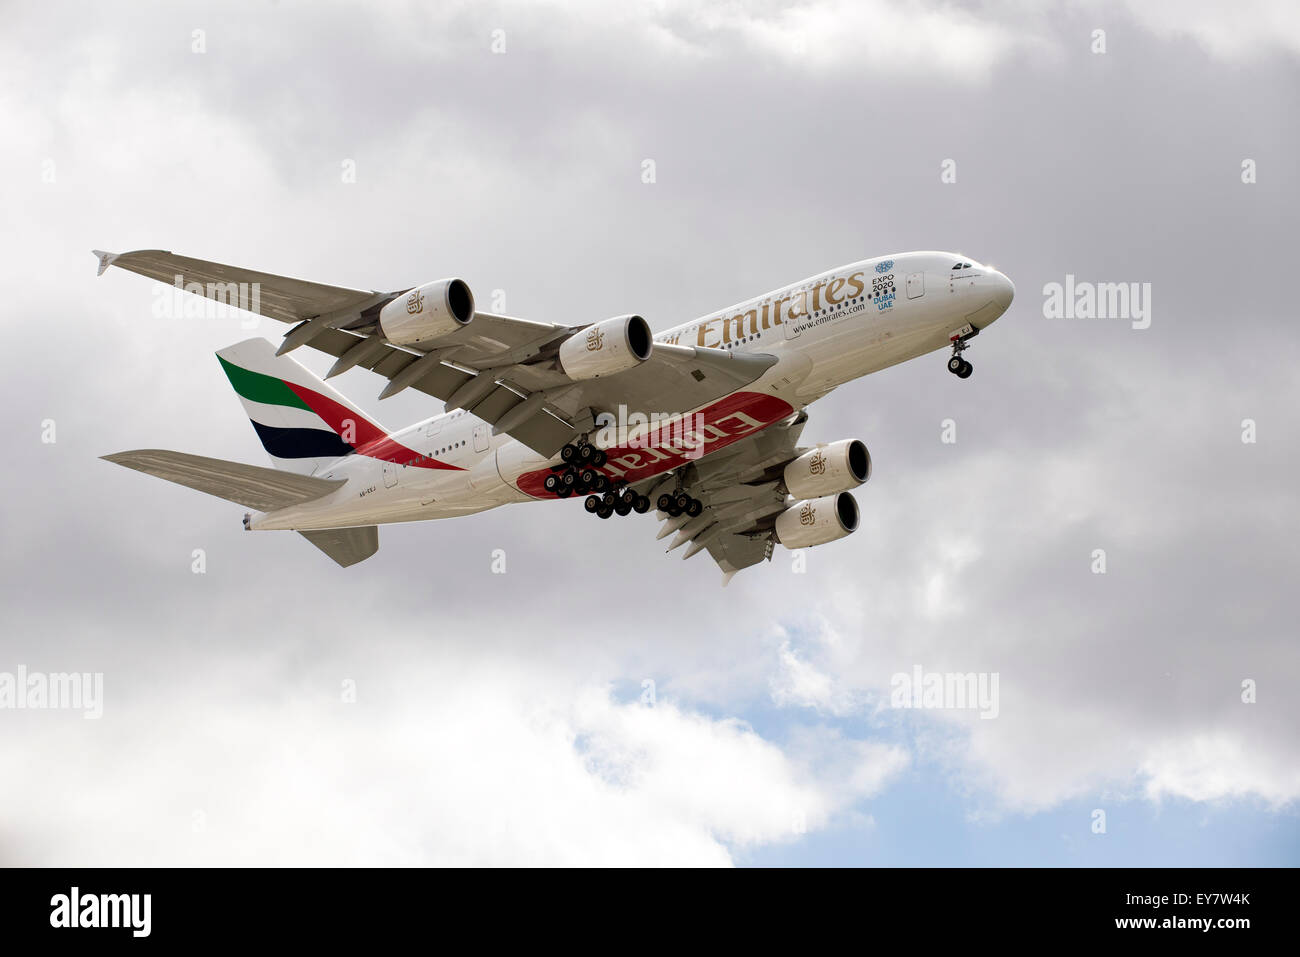 Emirates Airbus A380 passenger jet with landing gear down preparing on final approach to land Stock Photo